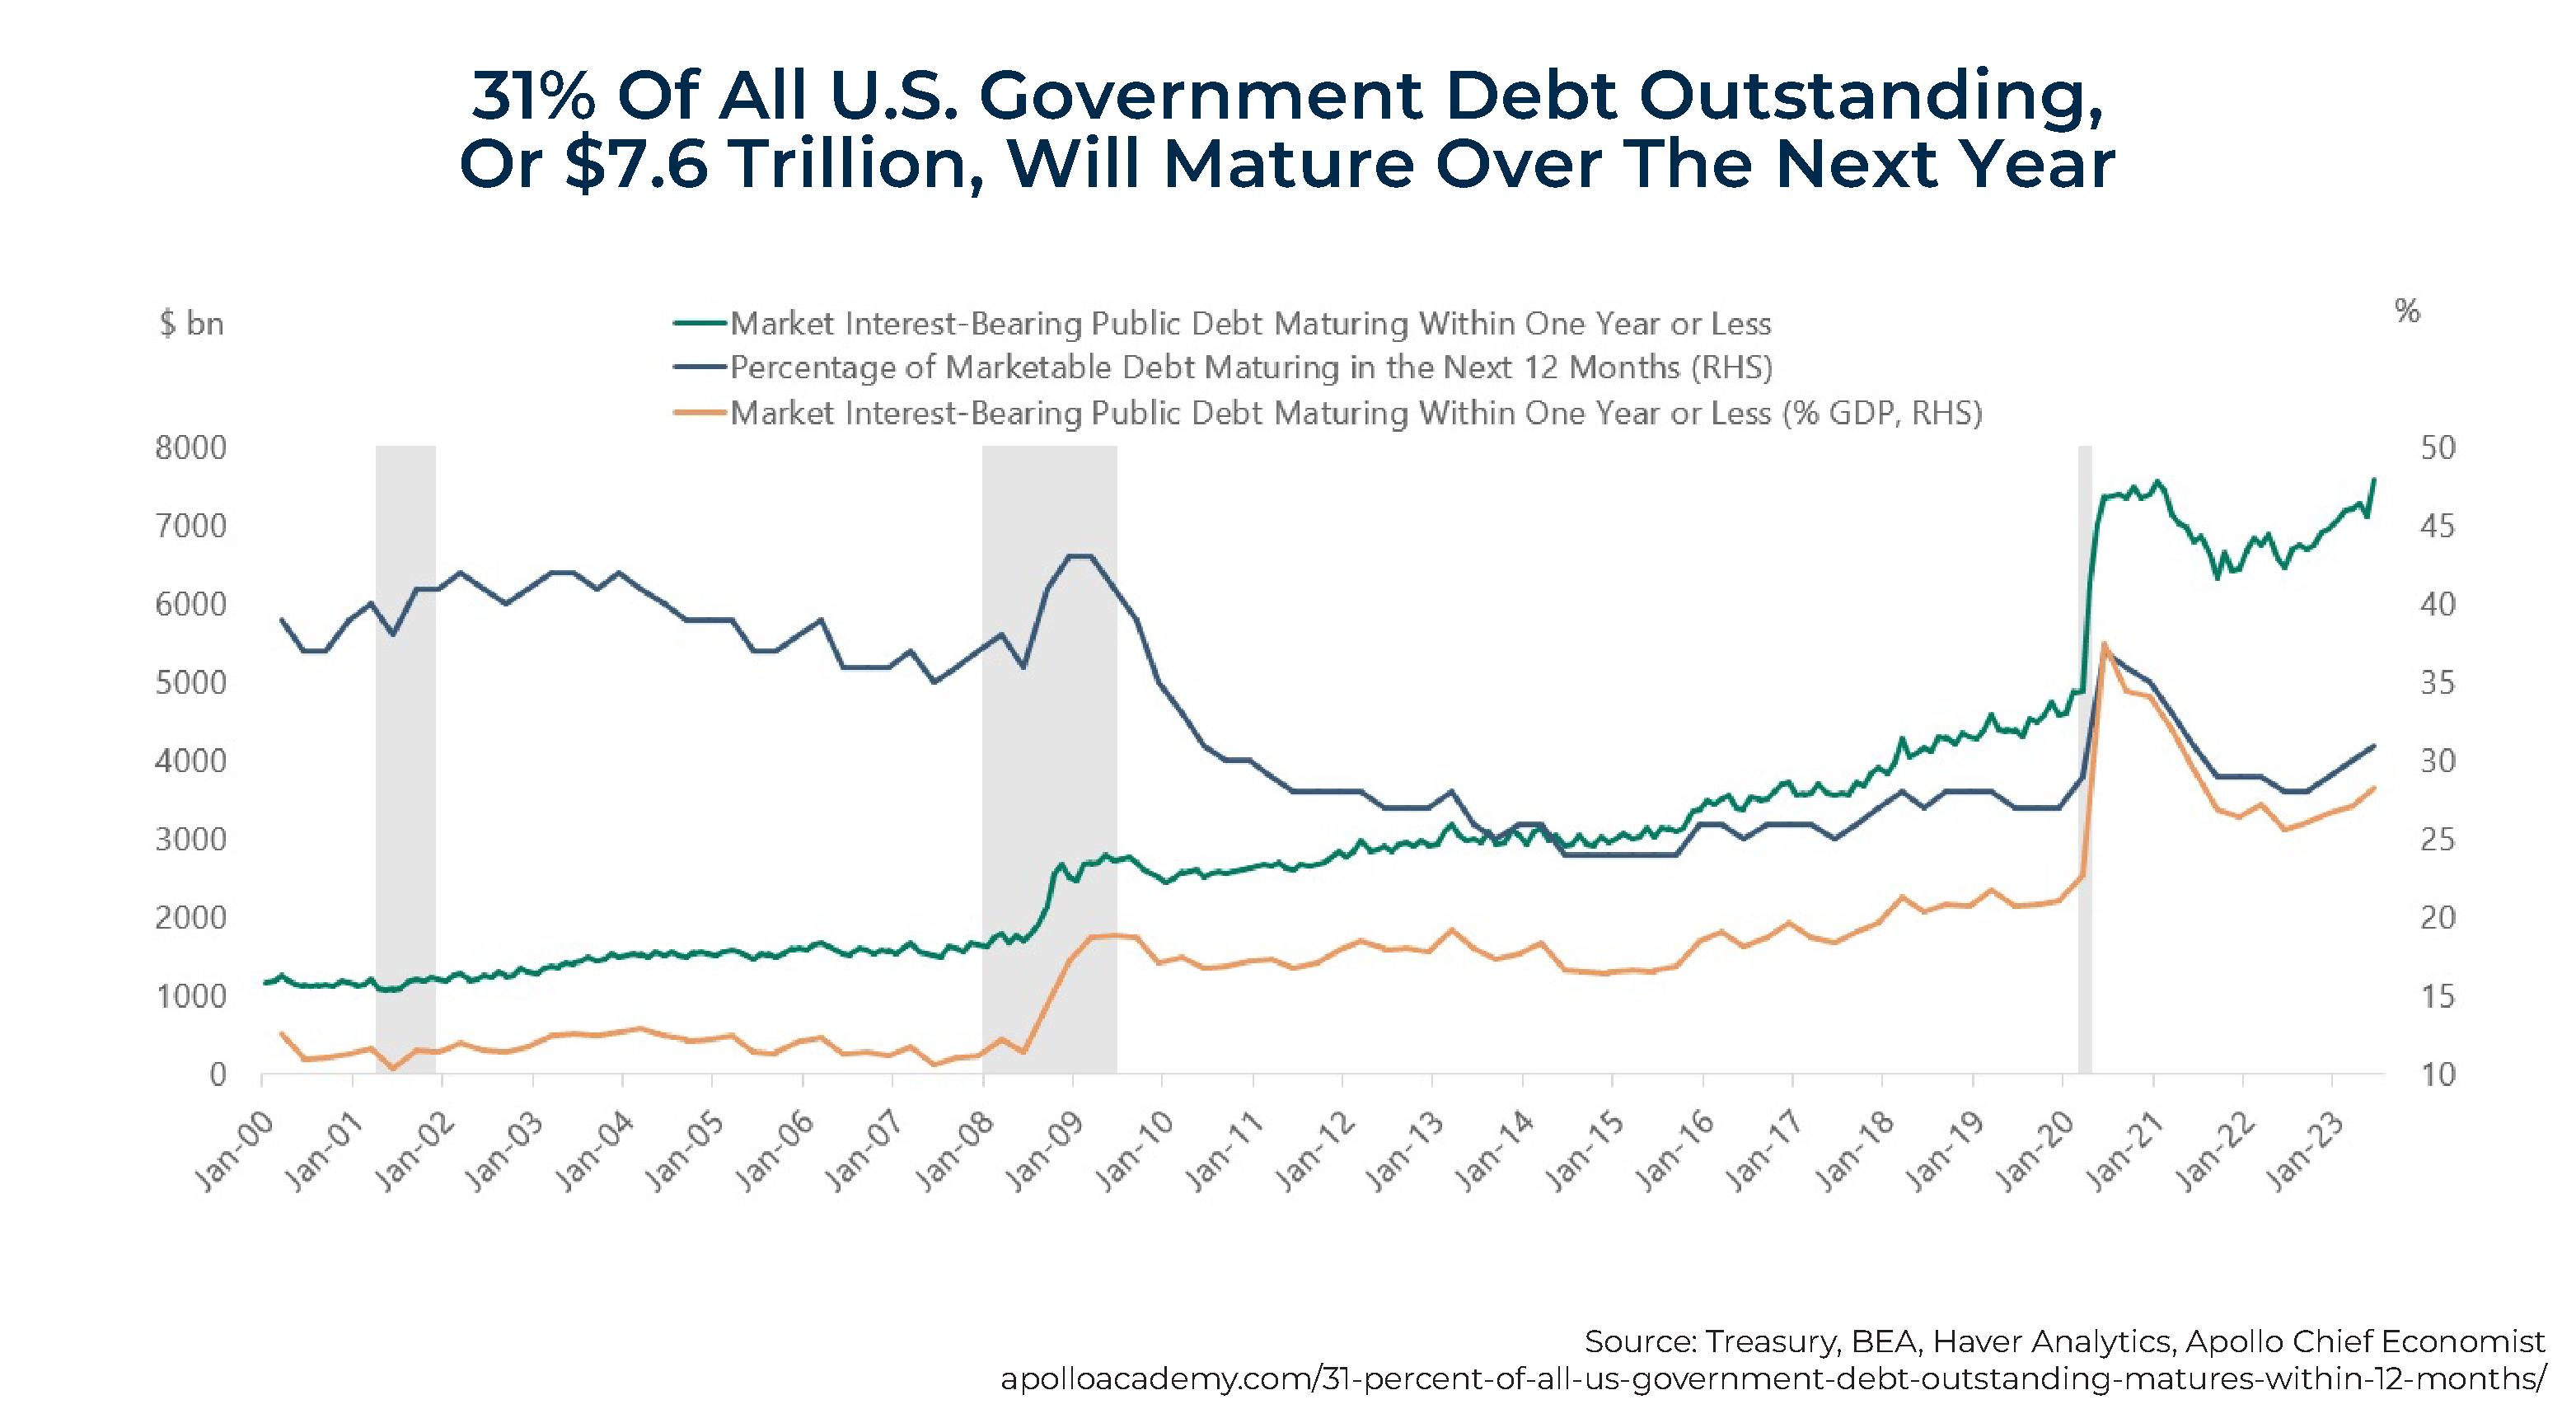 US Government Debt Outstanding Will Mature Over The Next Year